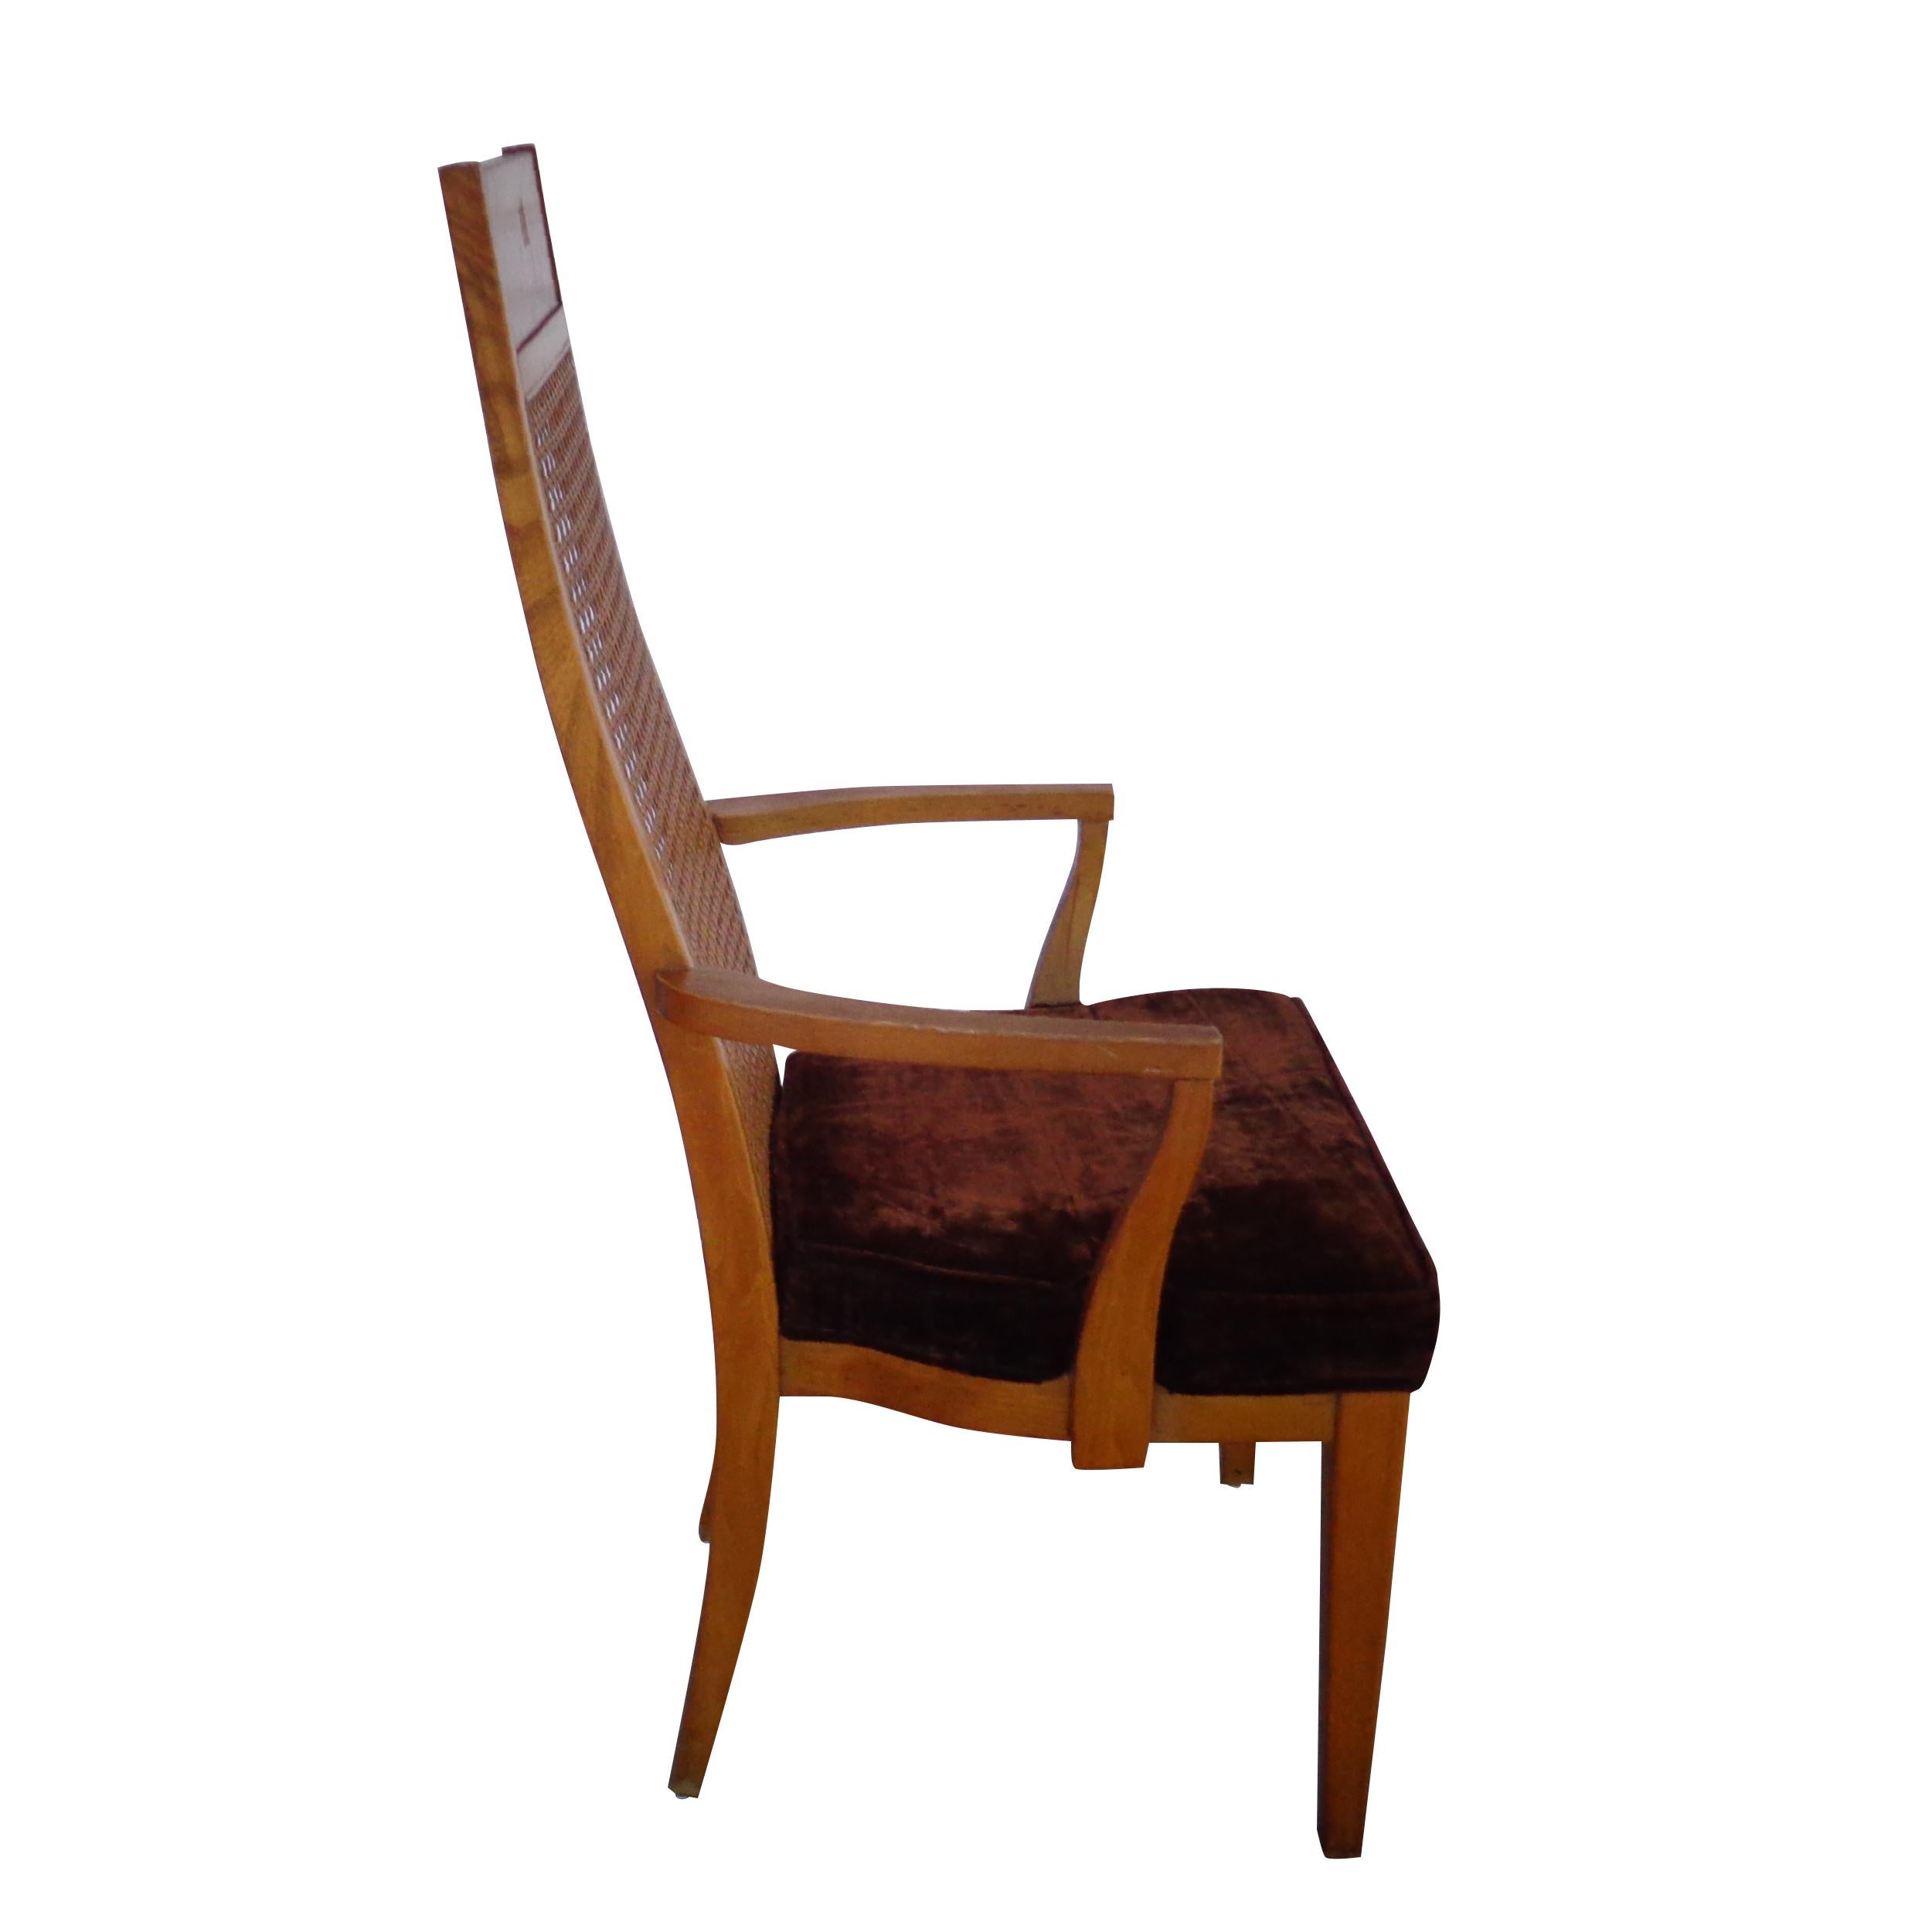 North American (1) Lane High Back Cane Burl Dining Chairs  6 AVAILABLE For Sale